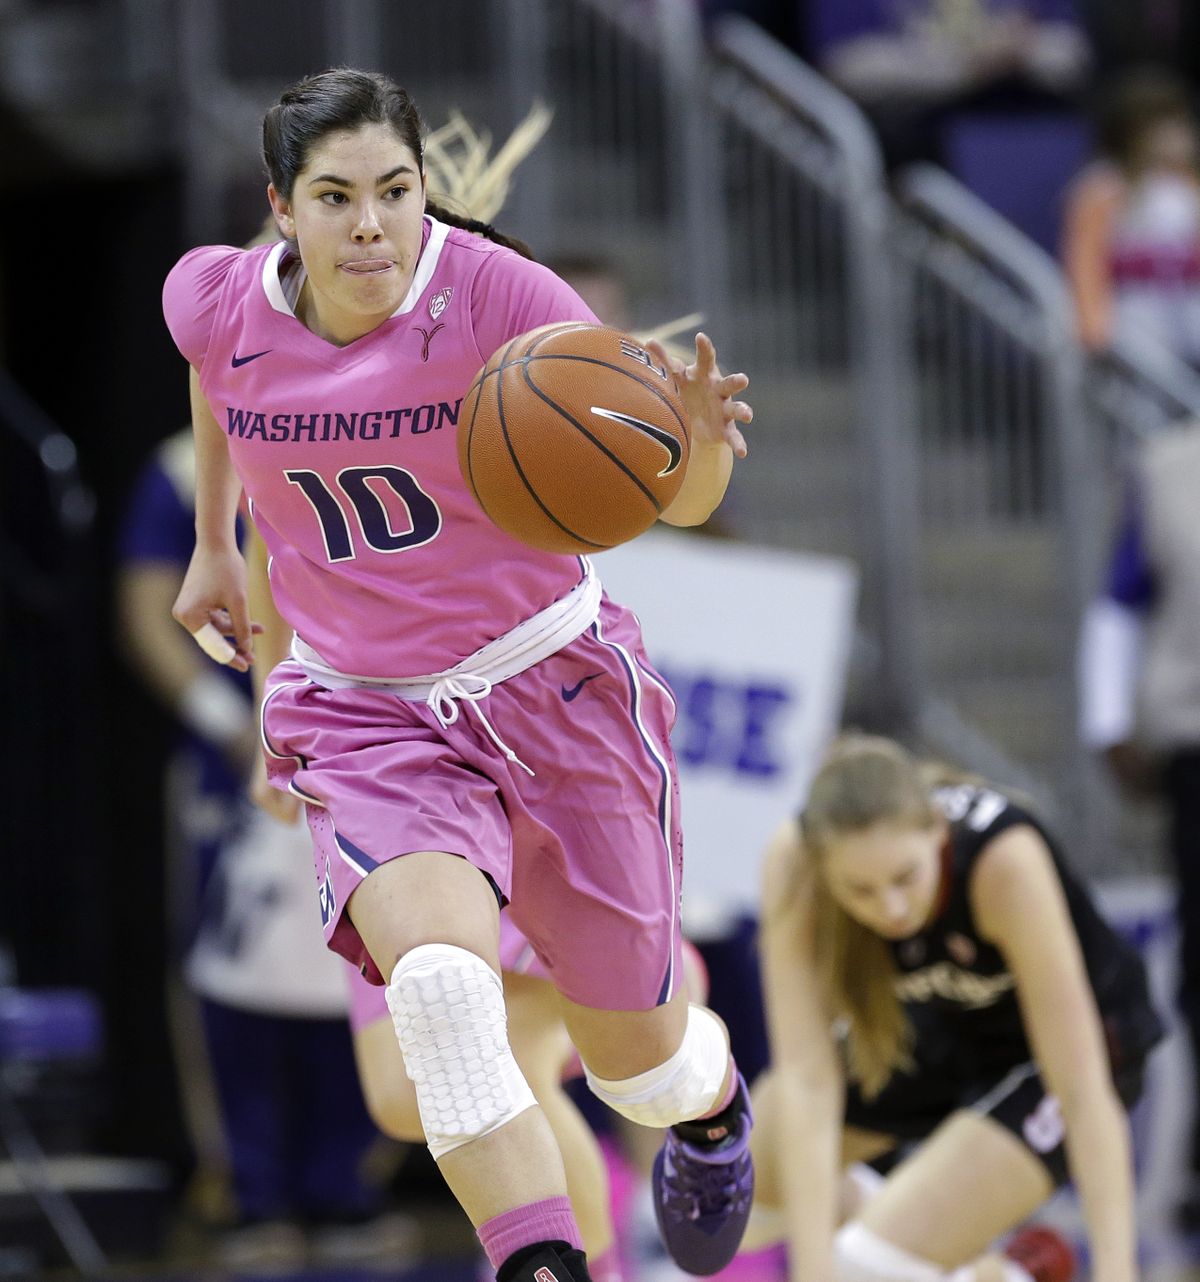 Kelsey Plum, who led UW 23 points, races up court against Stanford during Sunday’s game in Seattle. (Associated Press)